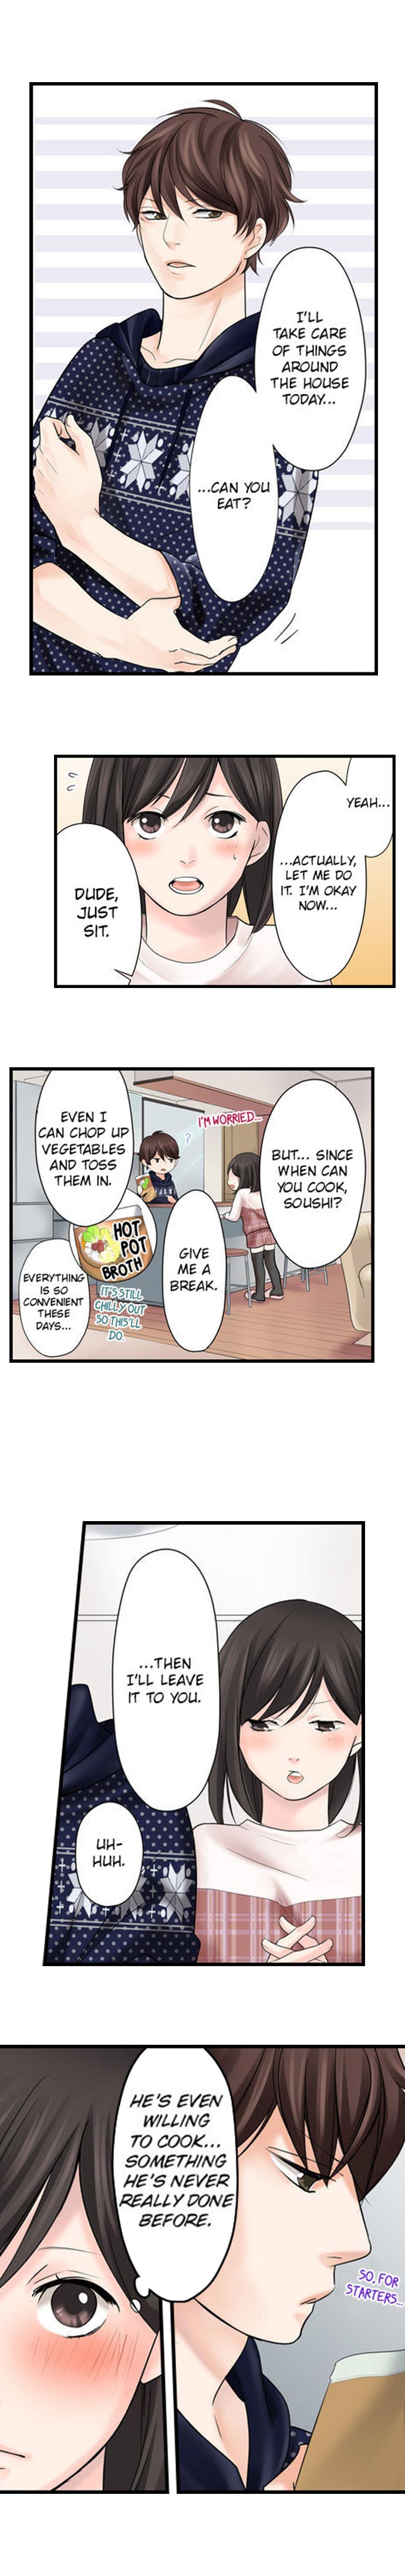 15 Years Old Starting Today Well Be Living Together - Chapter 7 Page 3